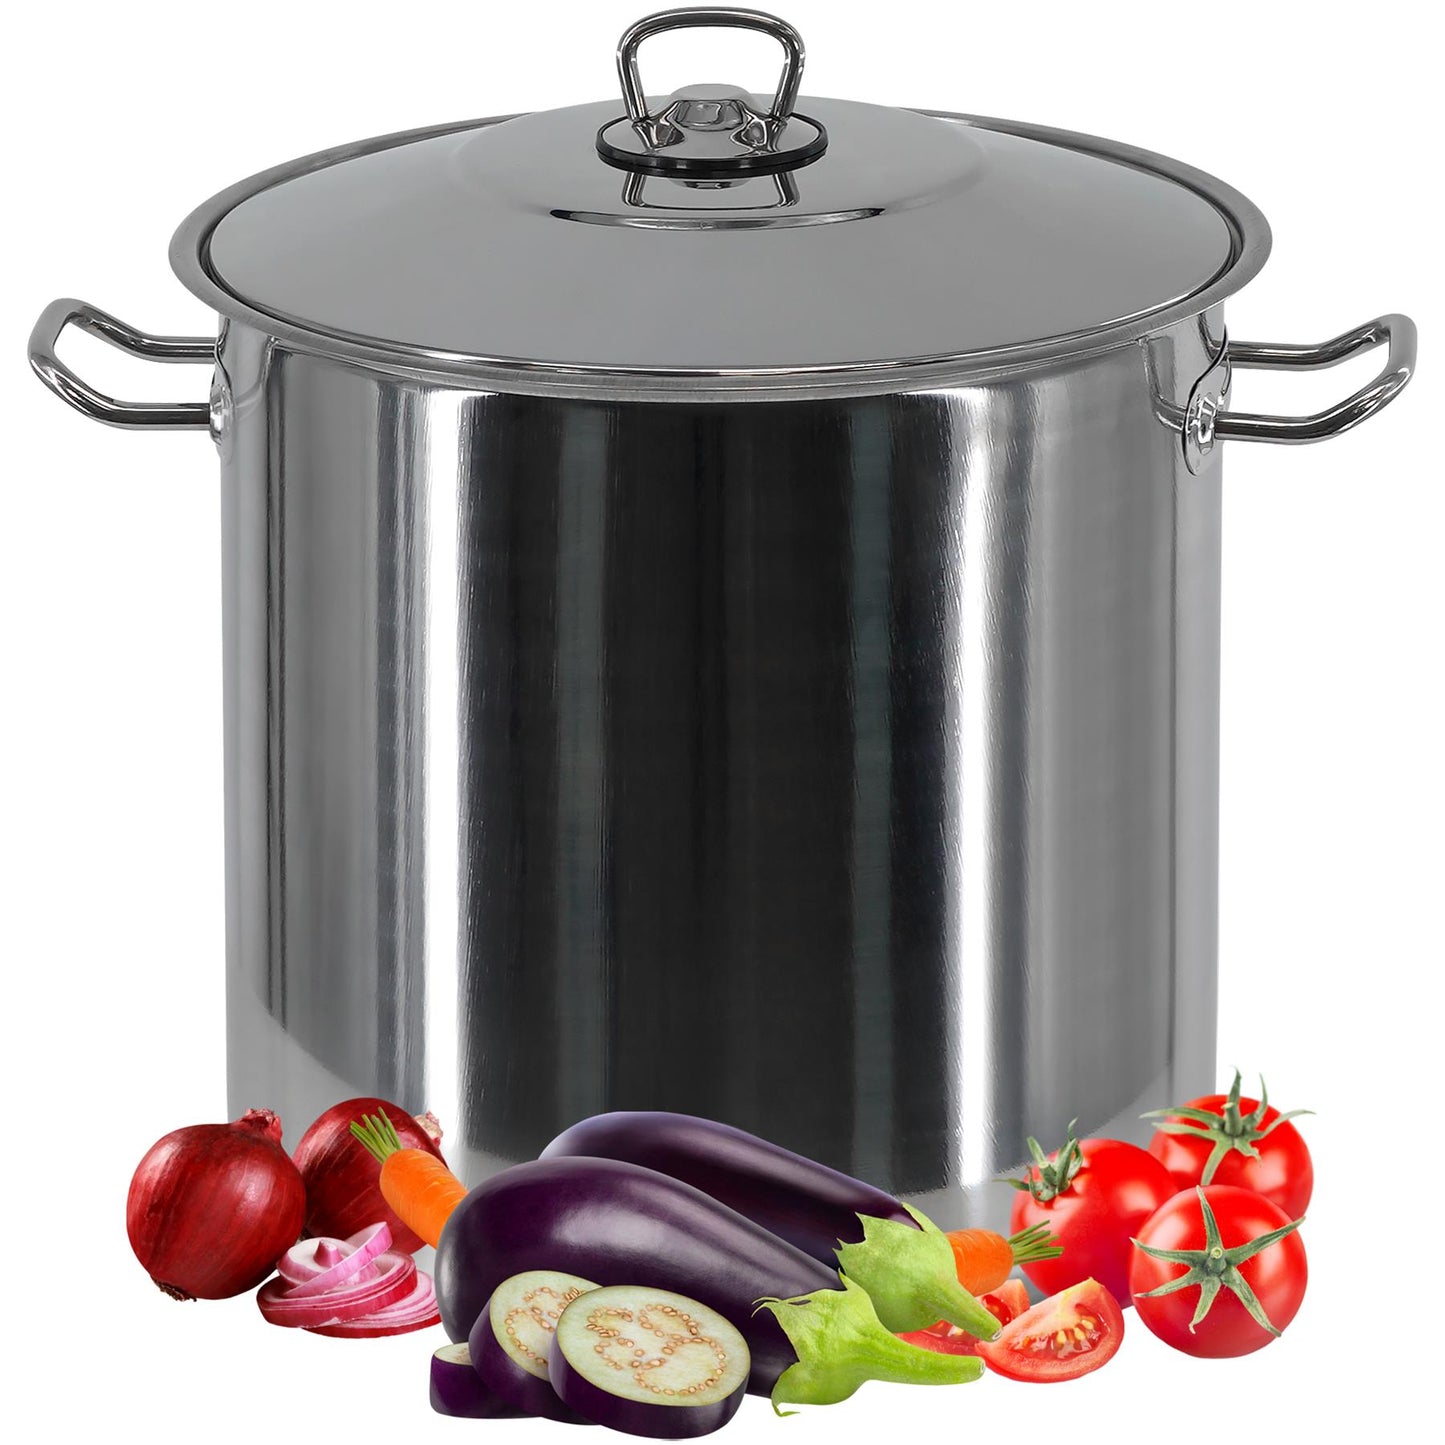 Arian Gastro Stock Pot - 21 Litre by GEEZY - UKBuyZone